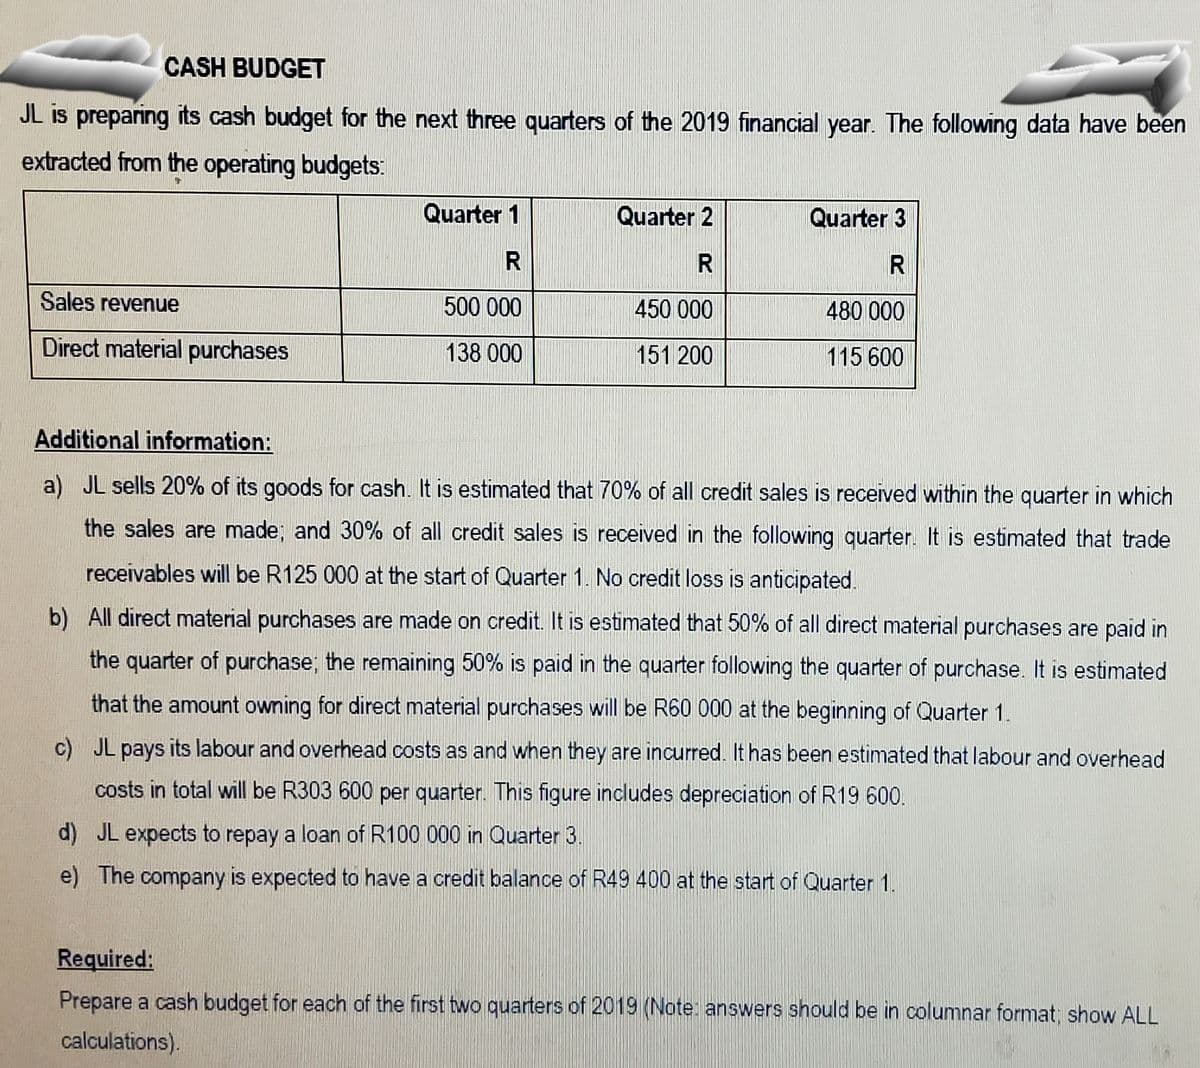 CASH BUDGET
JL is preparing its cash budget for the next three quarters of the 2019 financial year. The following data have been
extracted from the operating budgets:
Quarter 1
Quarter 2
Quarter 3
R
Sales revenue
500 000
450 000
480 000
Direct material purchases
138 000
151 200
115 600
Additional information:
a) JL sells 20% of its goods for cash. It is estimated that 70% of all credit sales is received within the quarter in which
the sales are made; and 30% of all credit sales is received in the following quarter. It is estimated that trade
receivables will be R125 000 at the start of Quarter 1. No credit loss is anticipated.
b) All direct material purchases are made on credit. It is estimated that 50% of all direct material purchases are paid in
the quarter of purchase; the remaining 50% is paid in the quarter following the quarter of purchase. It is estimated
that the amount owning for direct material purchases will be R60 000 at the beginning of Quarter 1.
c) JL pays its labour and overhead costs as and when they are incurred. It has been estimated that labour and overhead
costs in total will be R303 600 per quarter. This figure includes depreciation of R19 600.
d) JL expects to repay a loan of R100 000 in Quarter 3.
e) The company is expected to have a credit balance of R49 400 at the start of Quarter 1
Required:
Prepare a cash budget for each of the first two quarters of 2019 (Note: answers should be in columnar format, show ALL
calculations).
